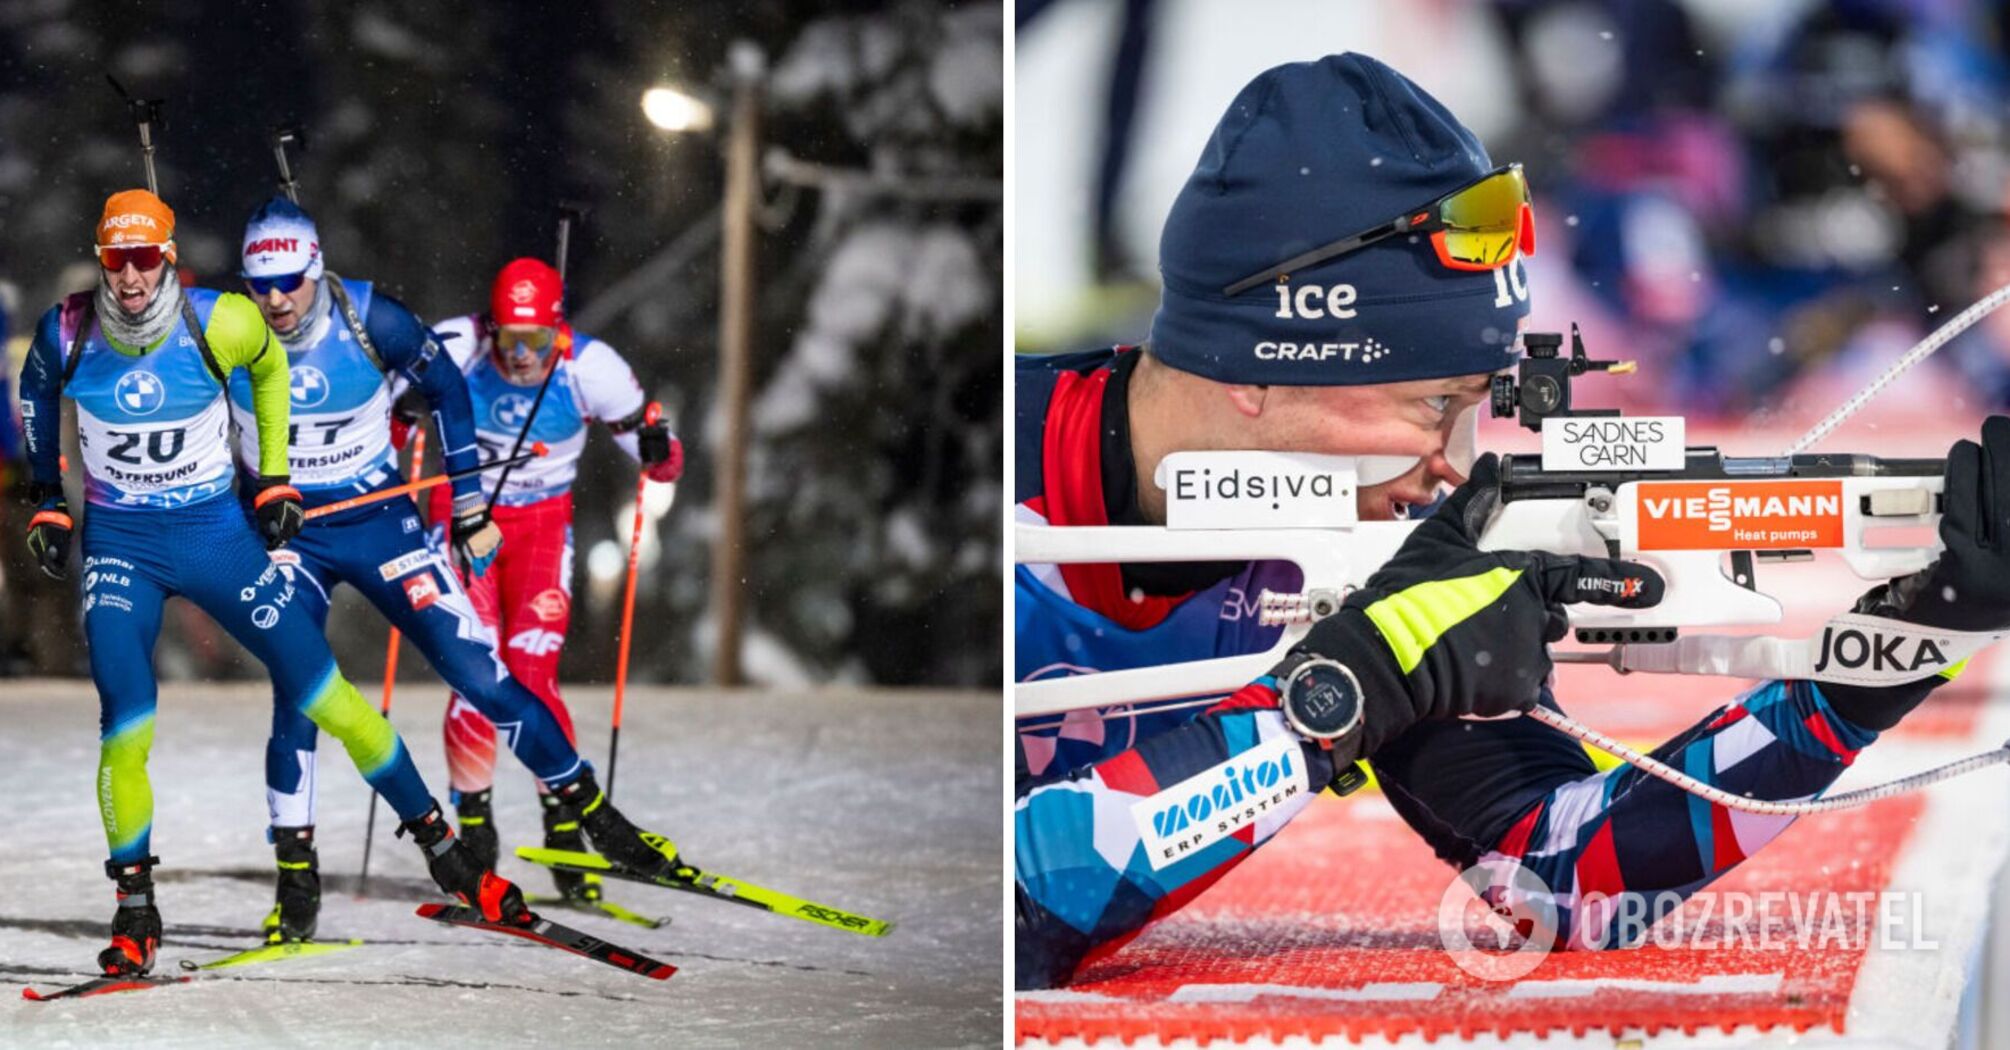 Murder of biathlon: Russia says World Cup is 'not interesting to anyone'